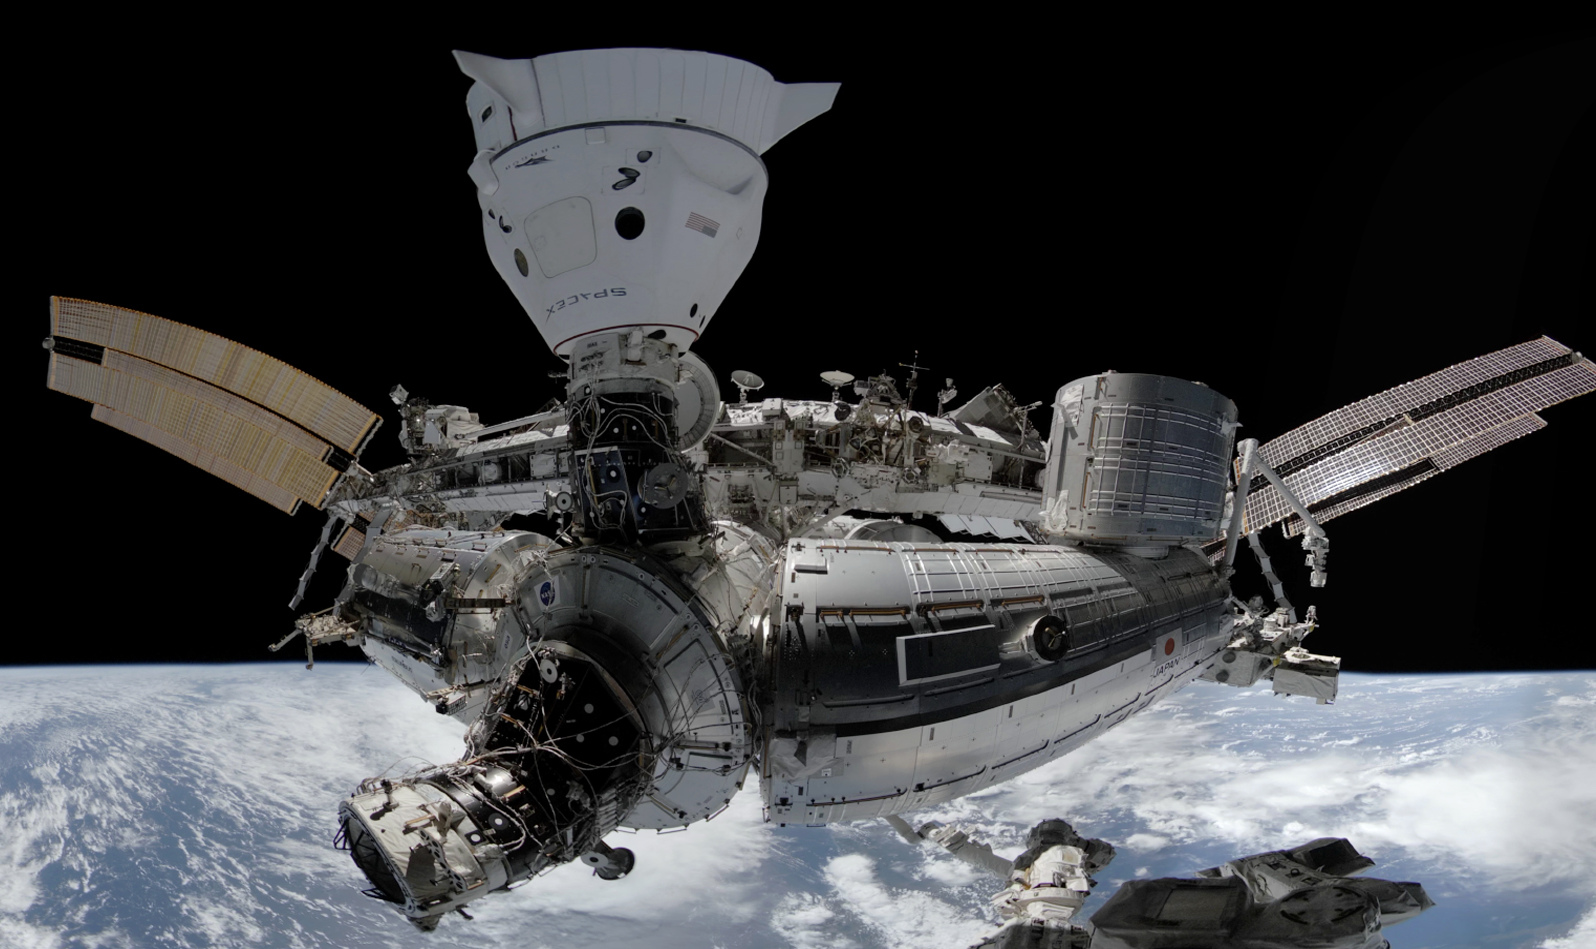 You will soon be able to experience spacewalking through virtual reality